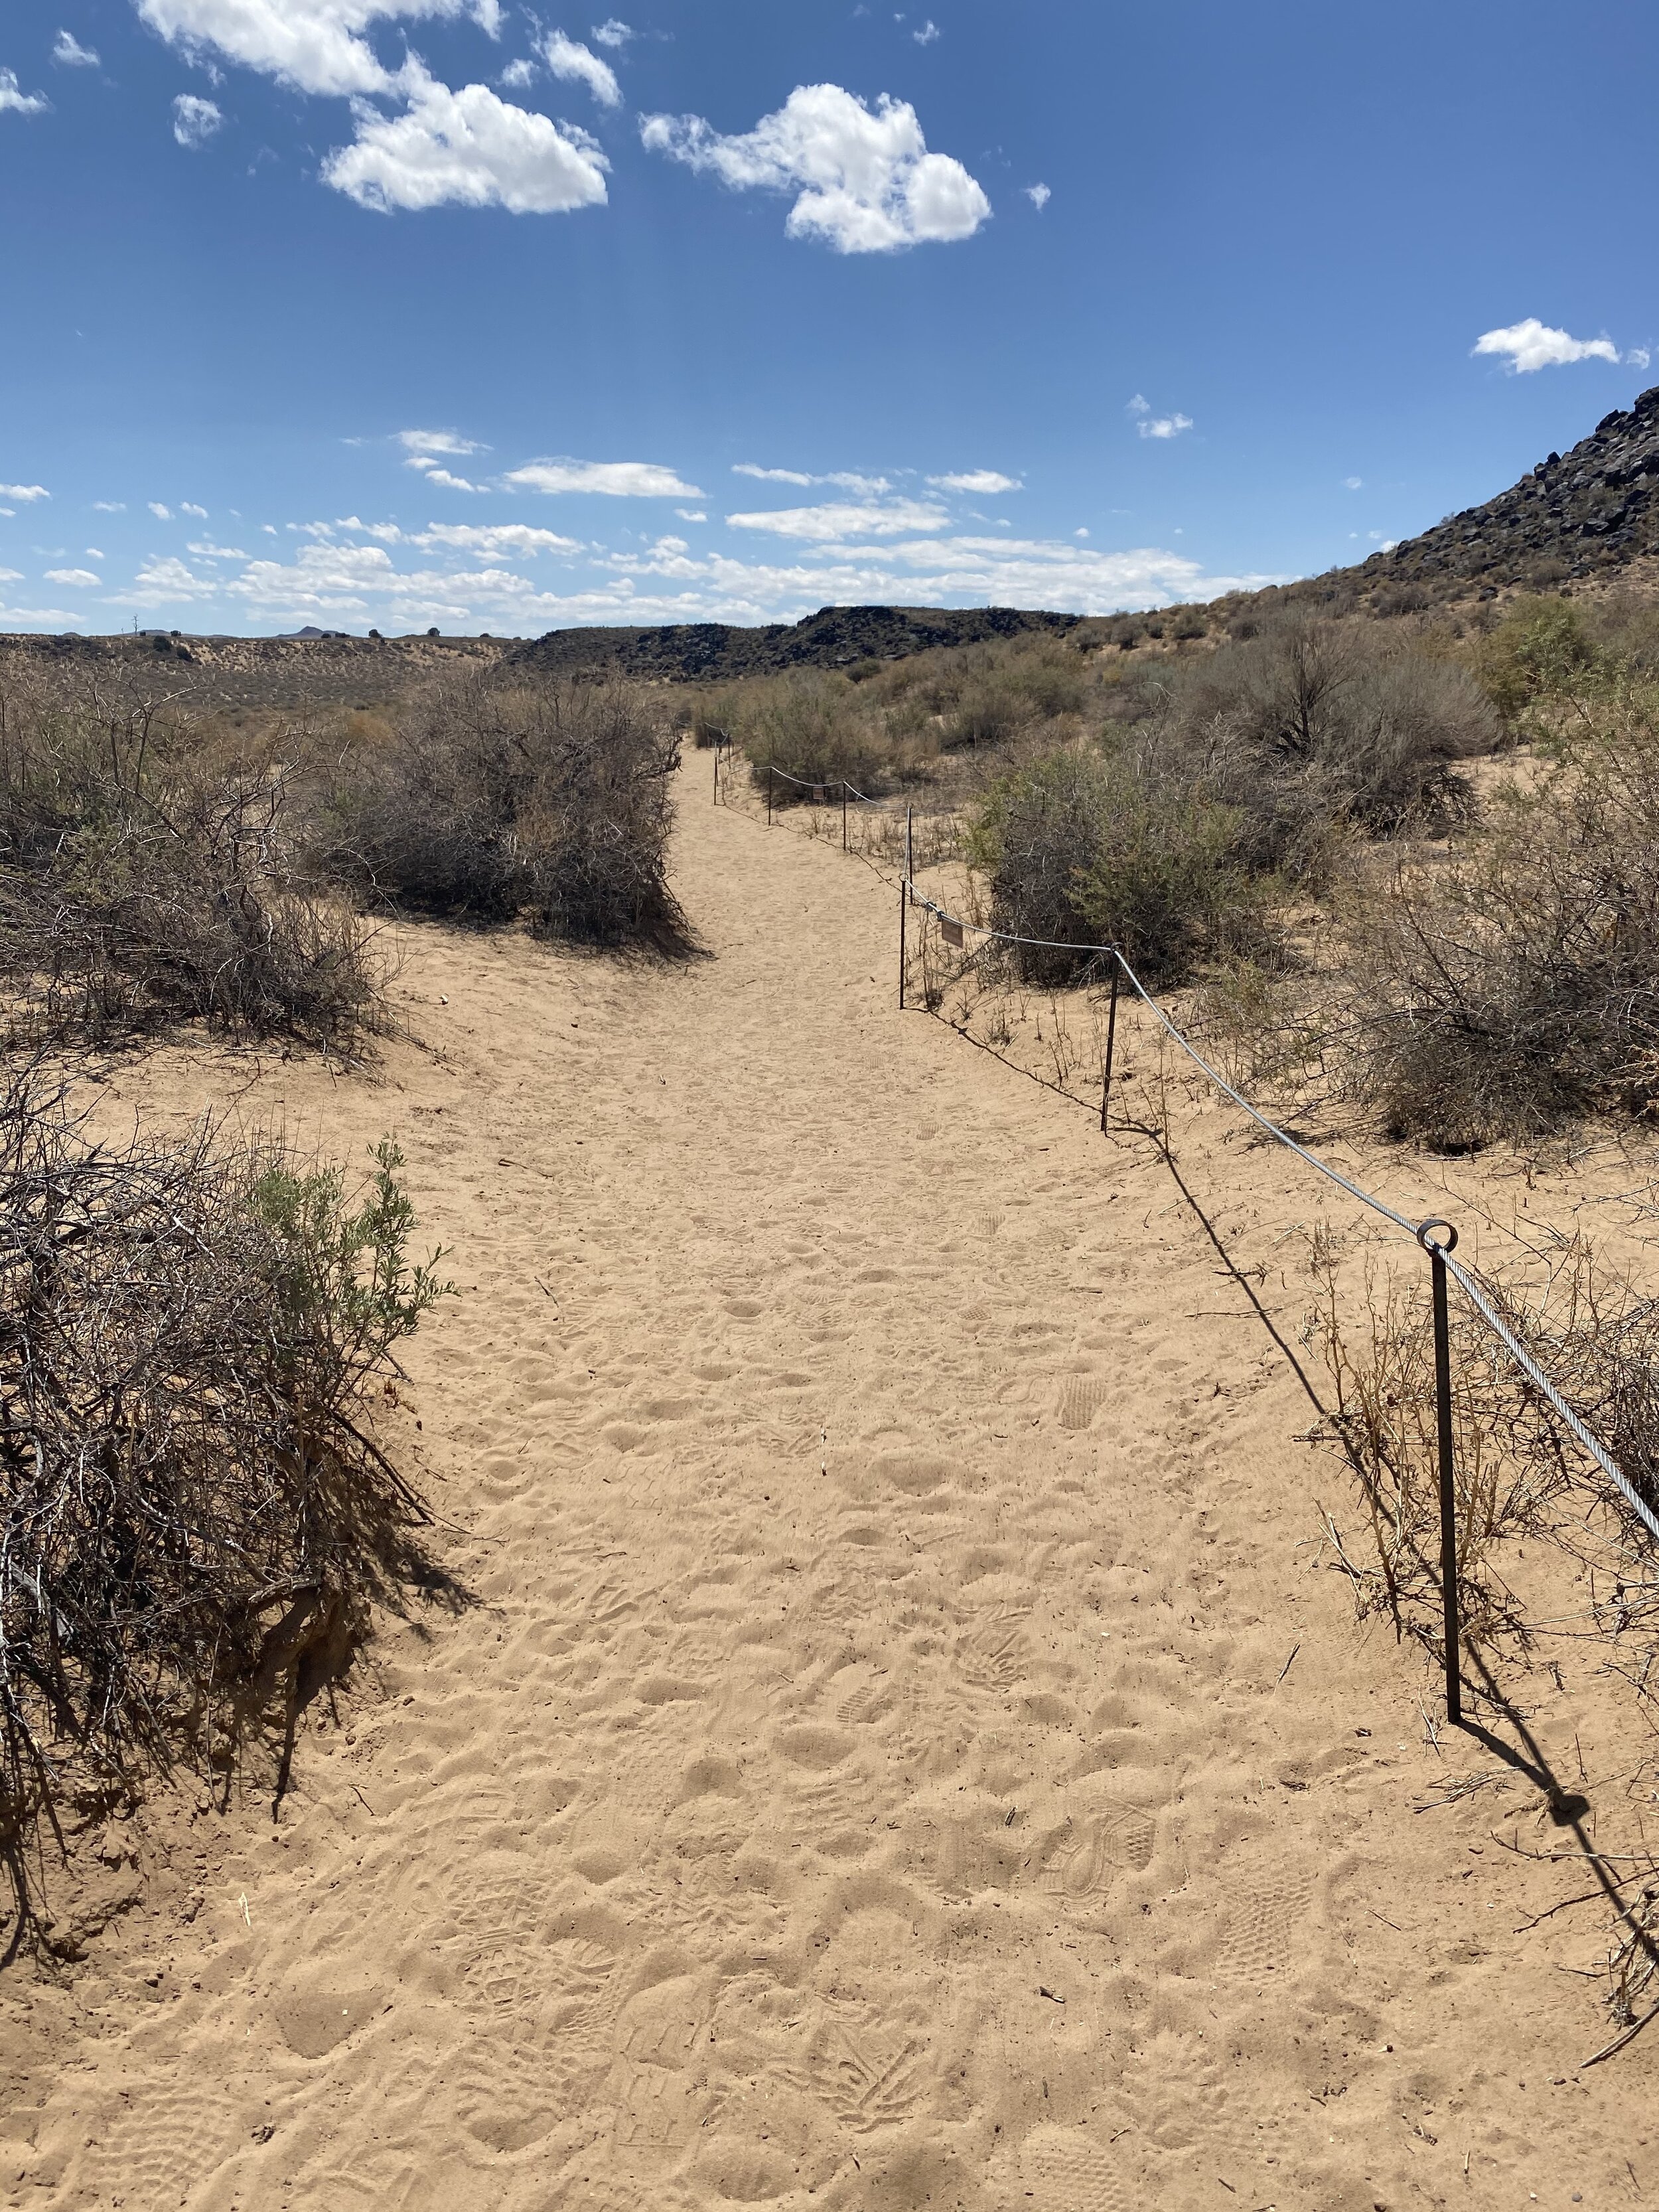 Sandy walking path at Petroglyph National Monument in New Mexico